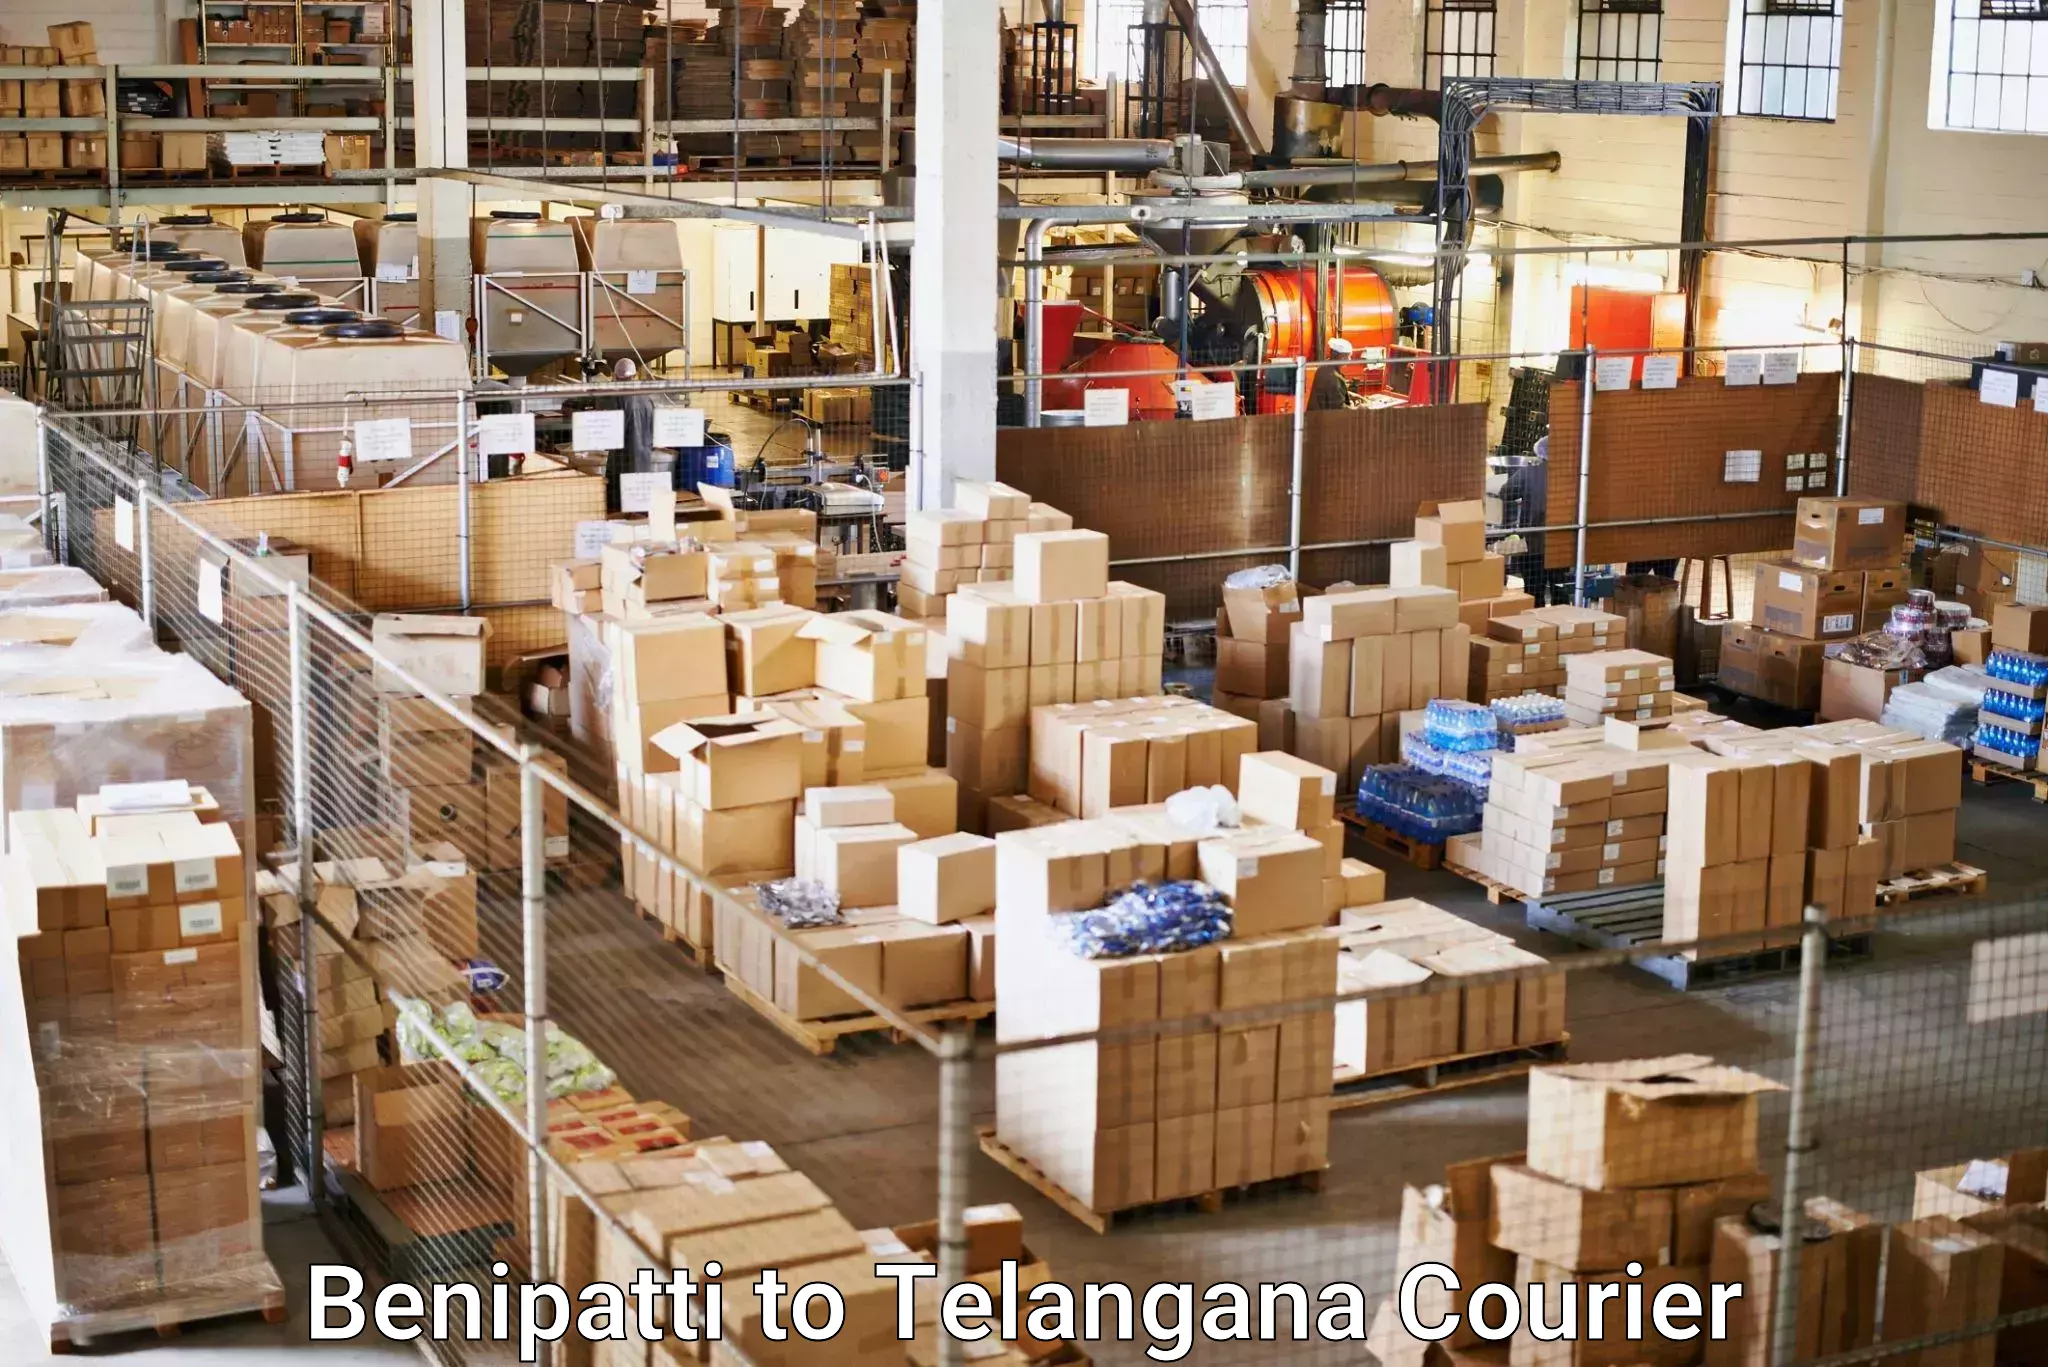 End-to-end delivery Benipatti to Telangana